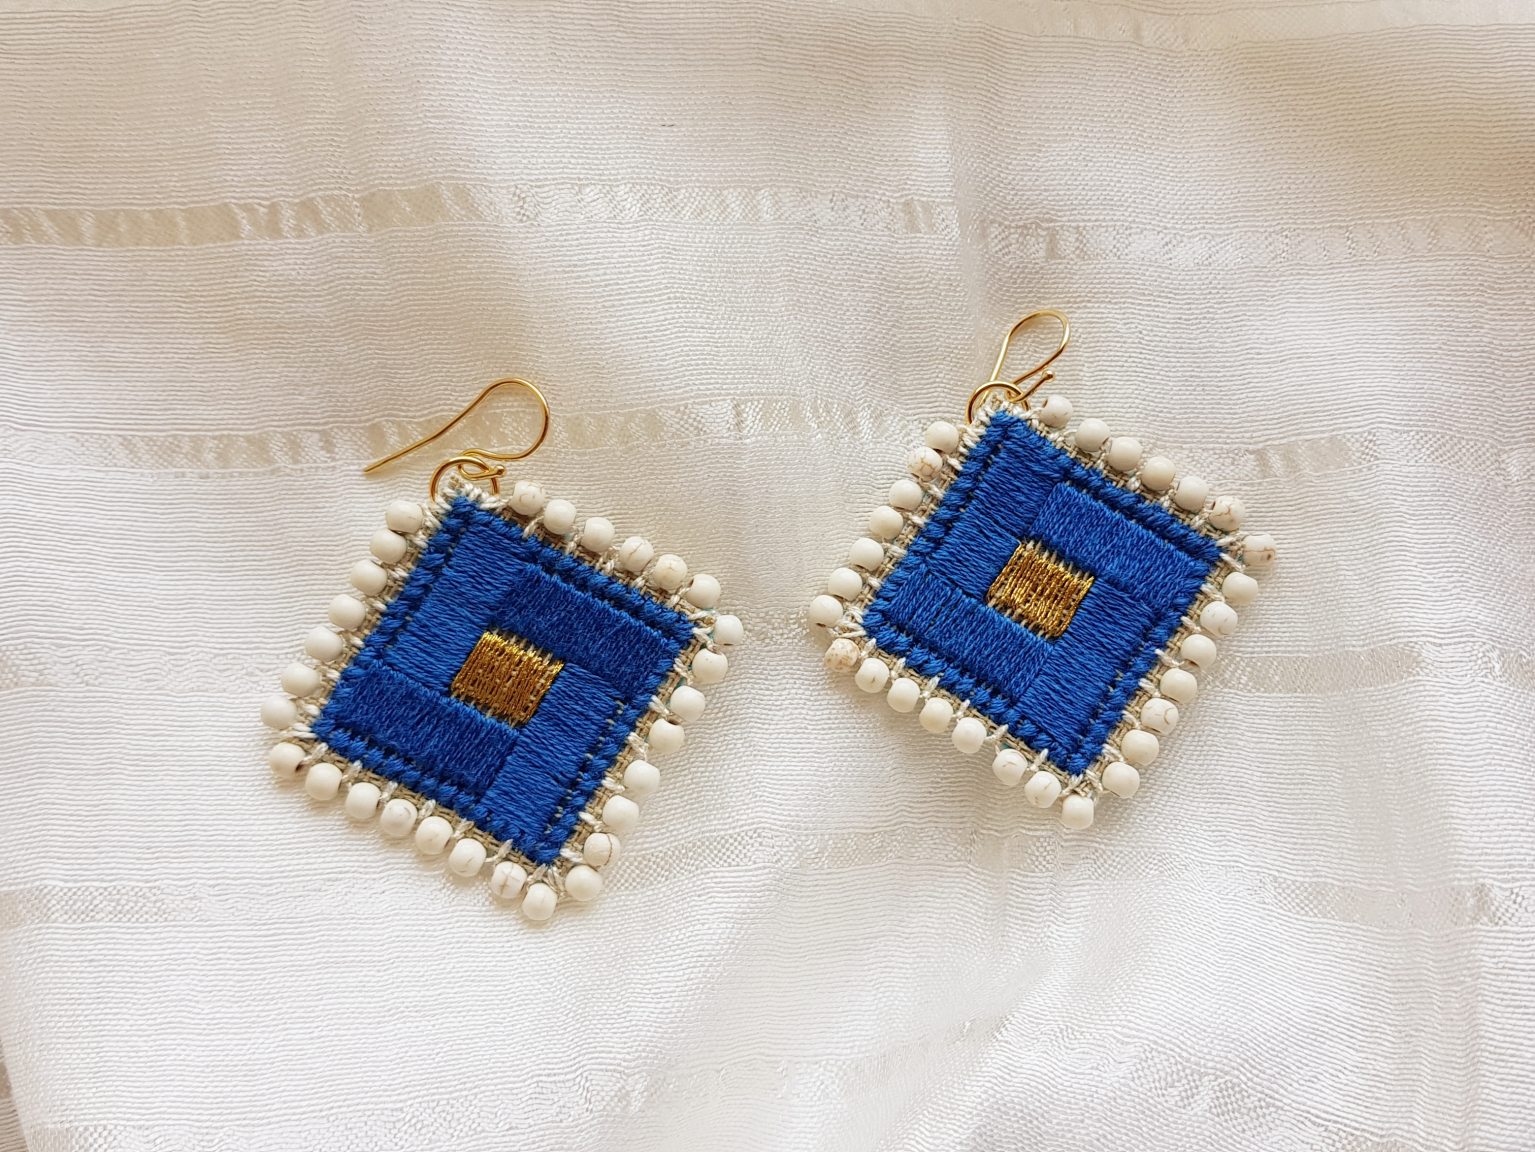 Blue hand-stitched earrings with white howlites